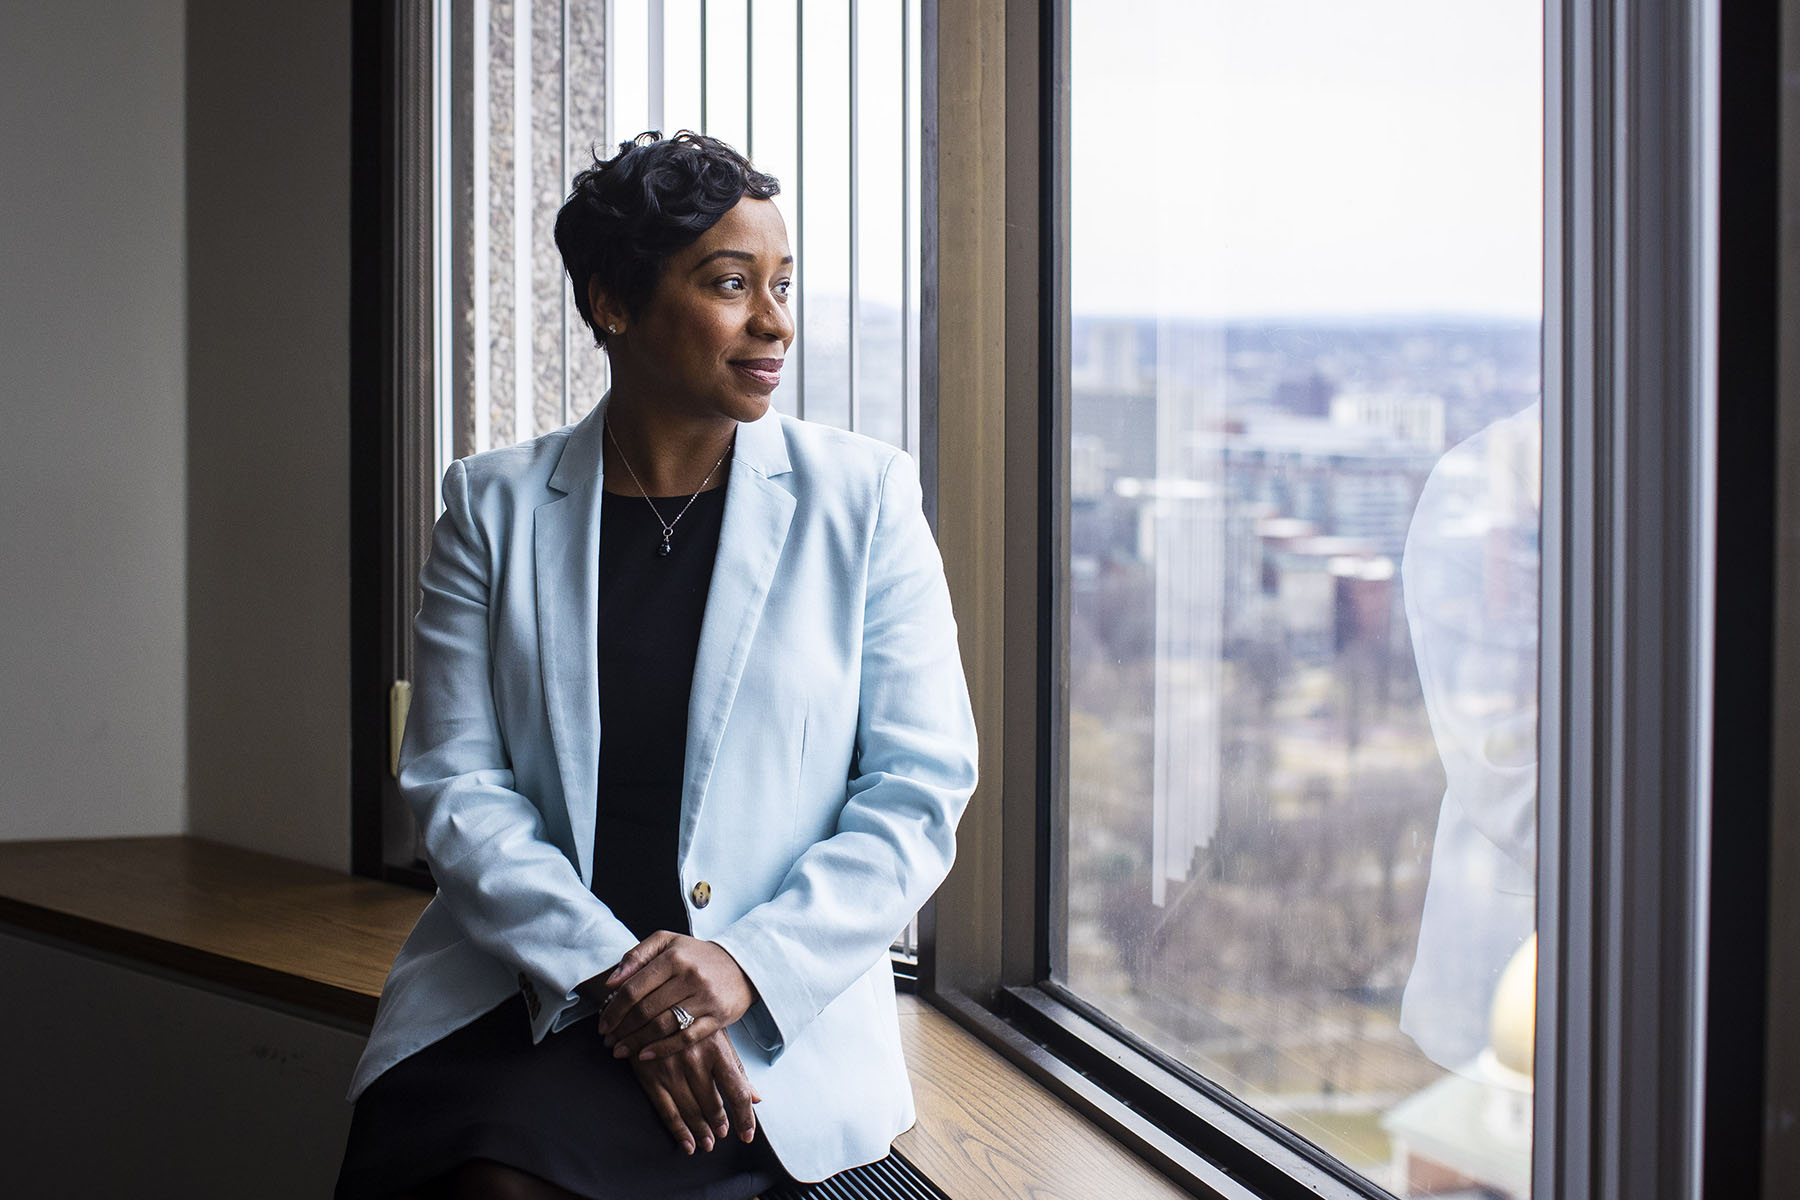 Massachusetts Attorney General Andrea Campbell poses for a portrait in the John W. McCormack Building.